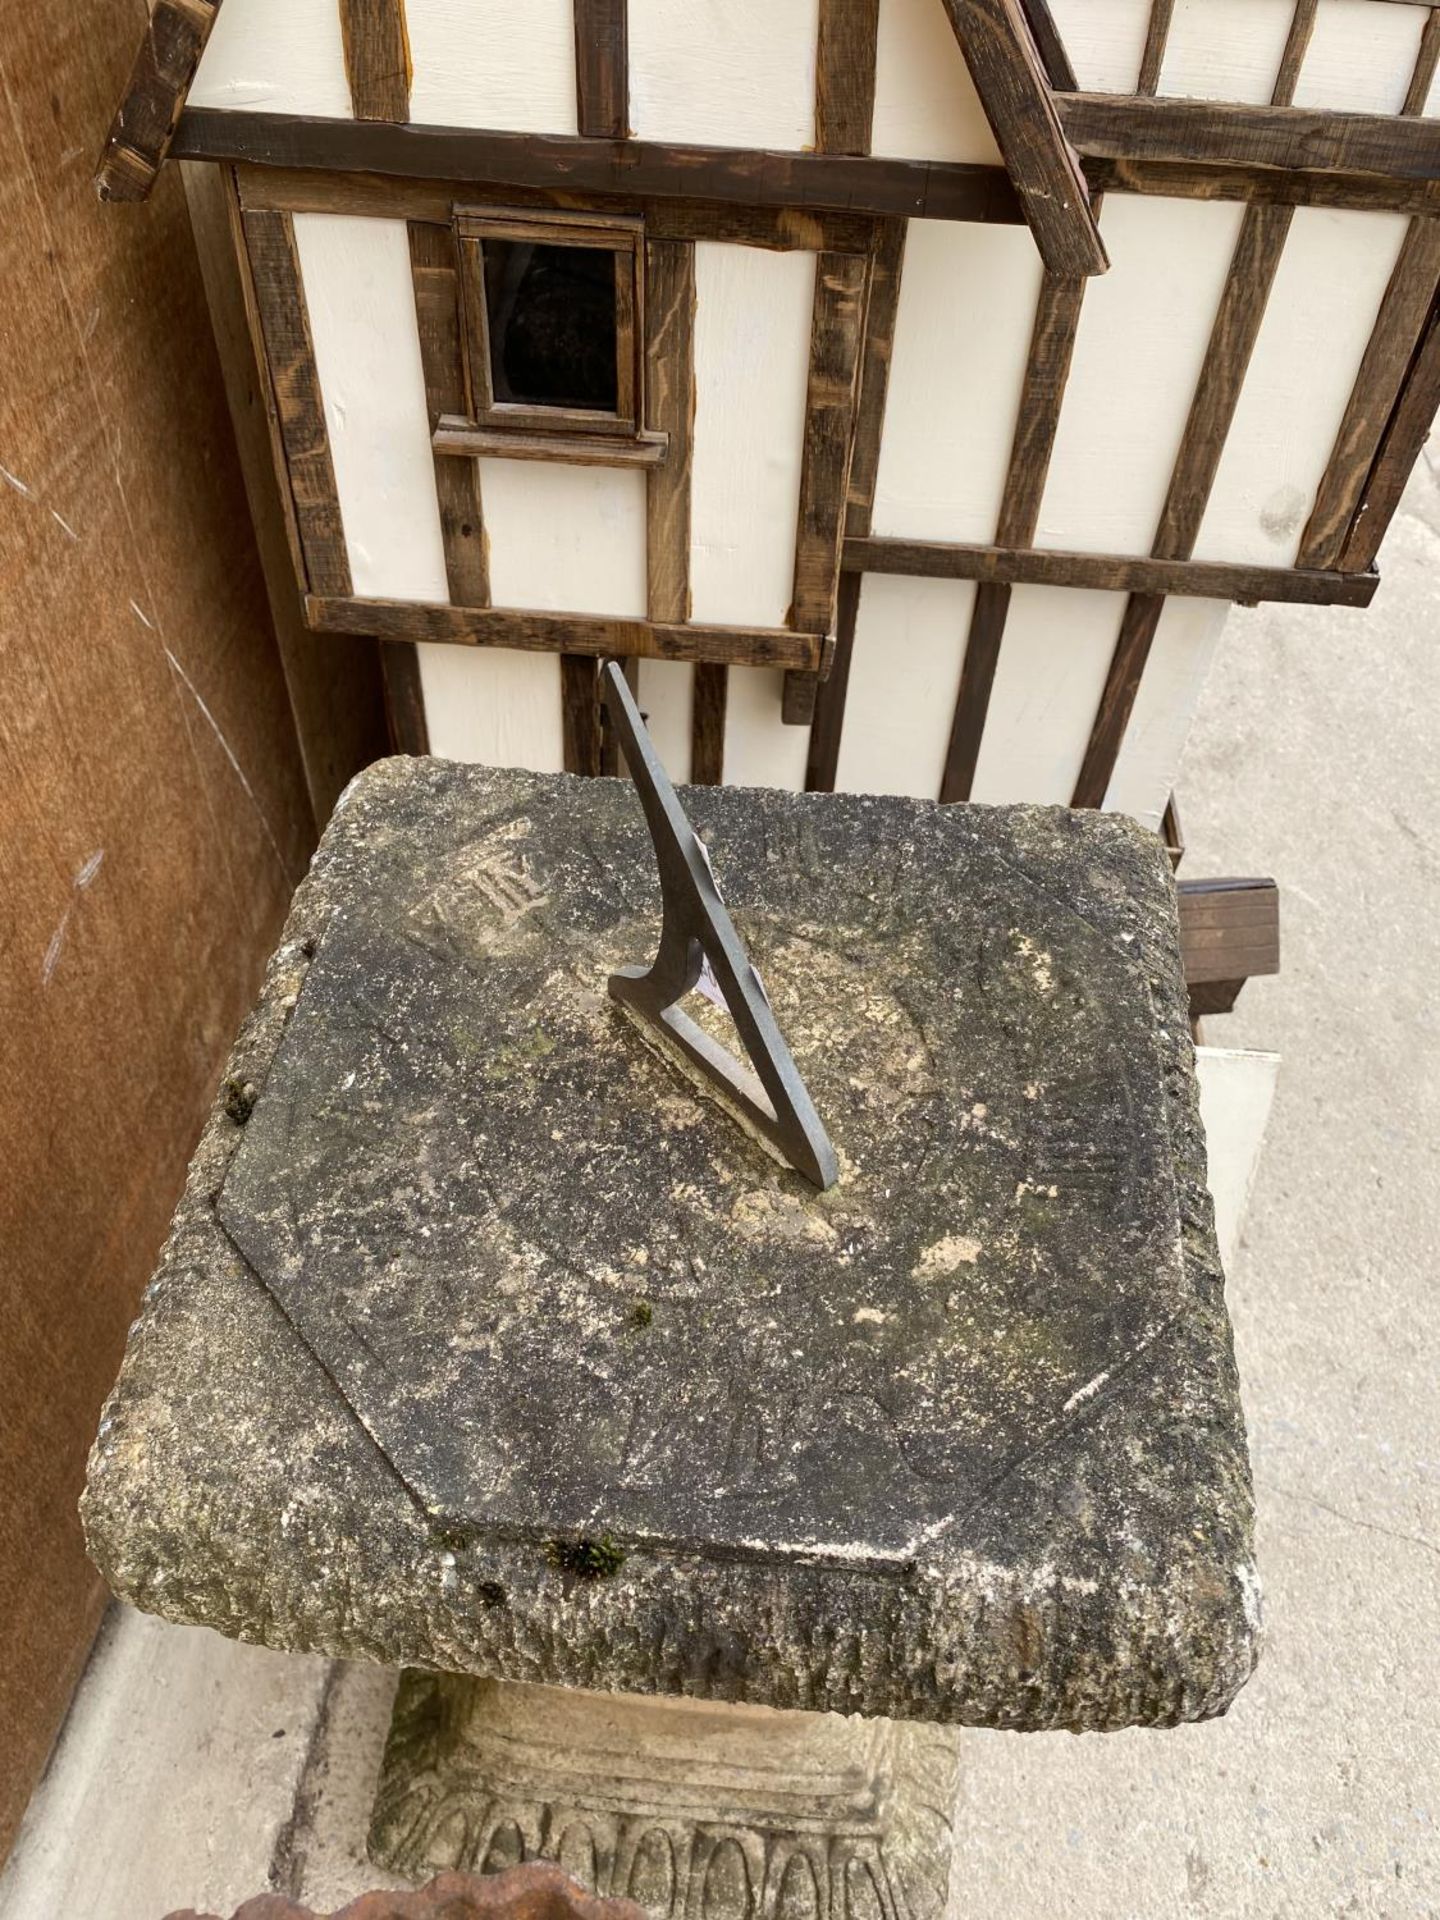 A RECONSTITUTED STONE SUN DIAL - Image 2 of 3